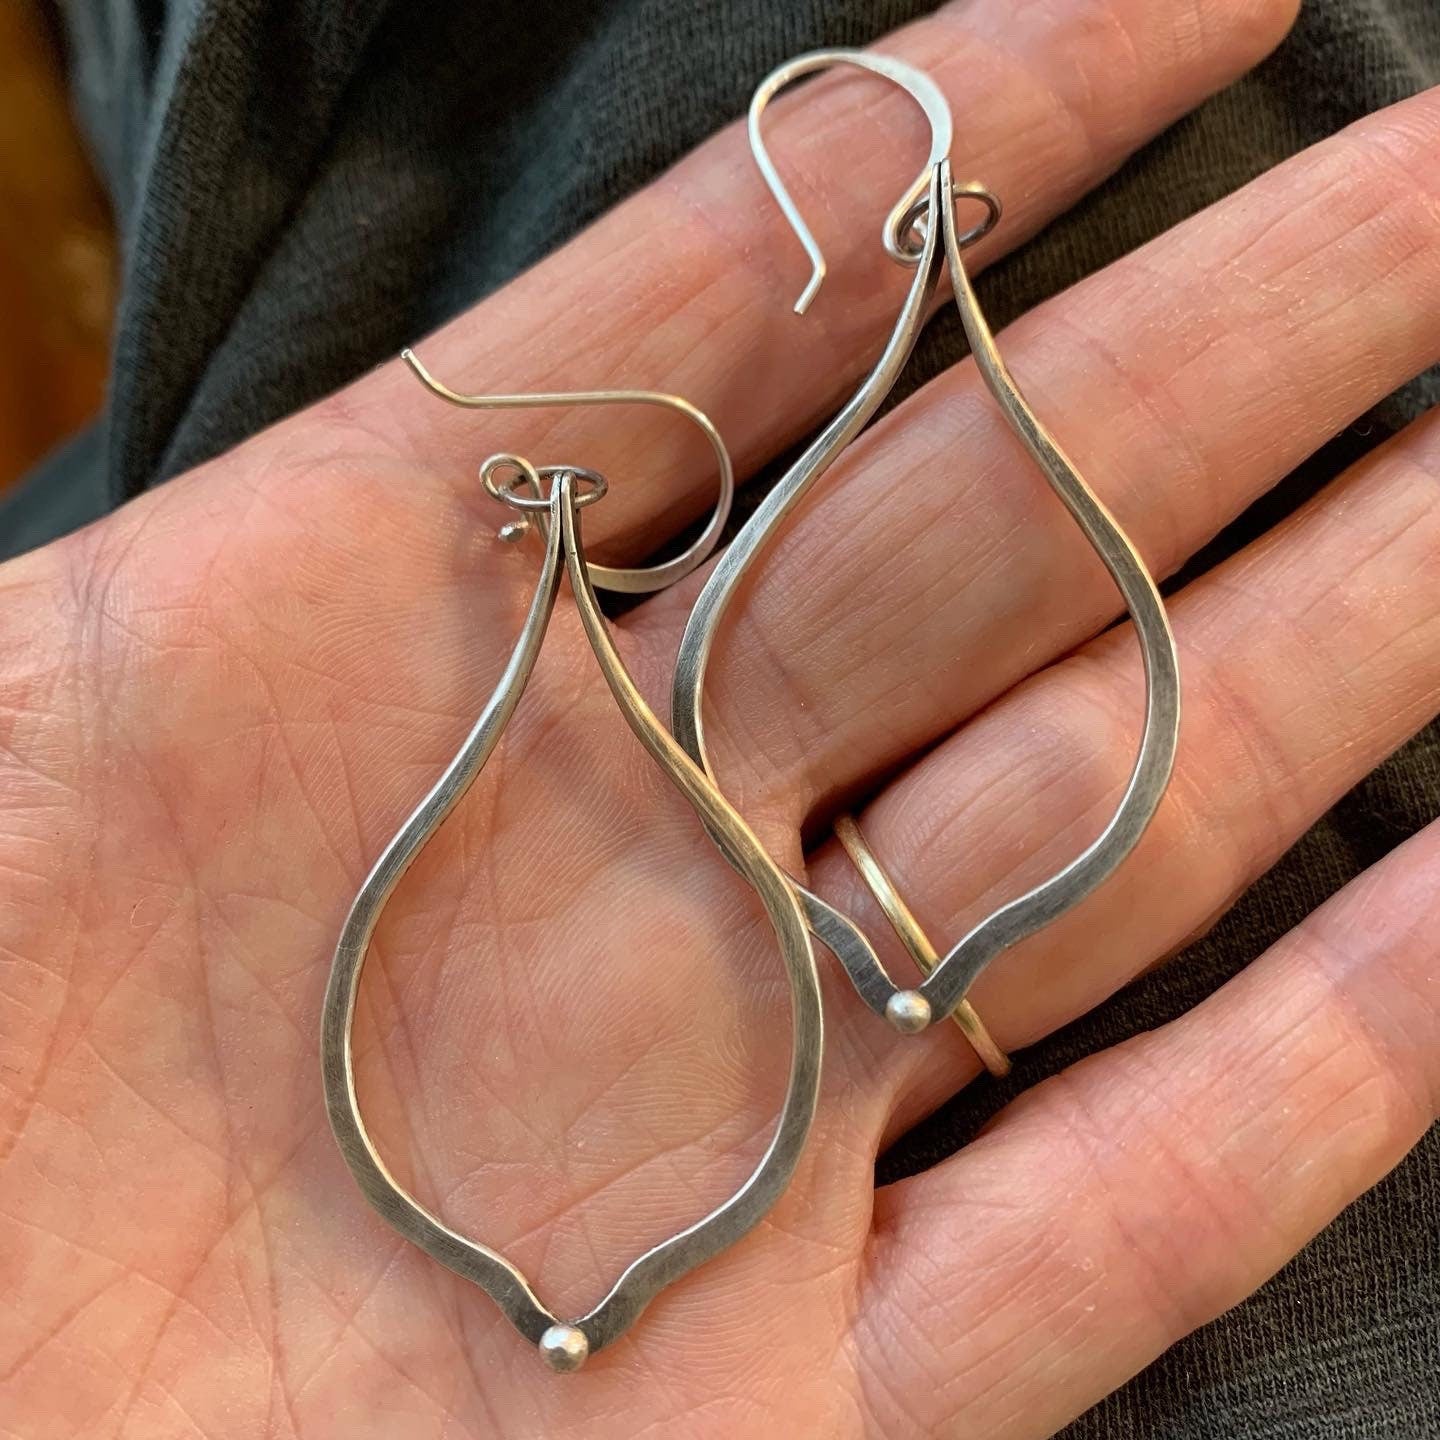 Sterling earring - long hoop - leaf shape - tribal inspired jewelry - jewelry for goddesses - earrings with organic shape - forged metal